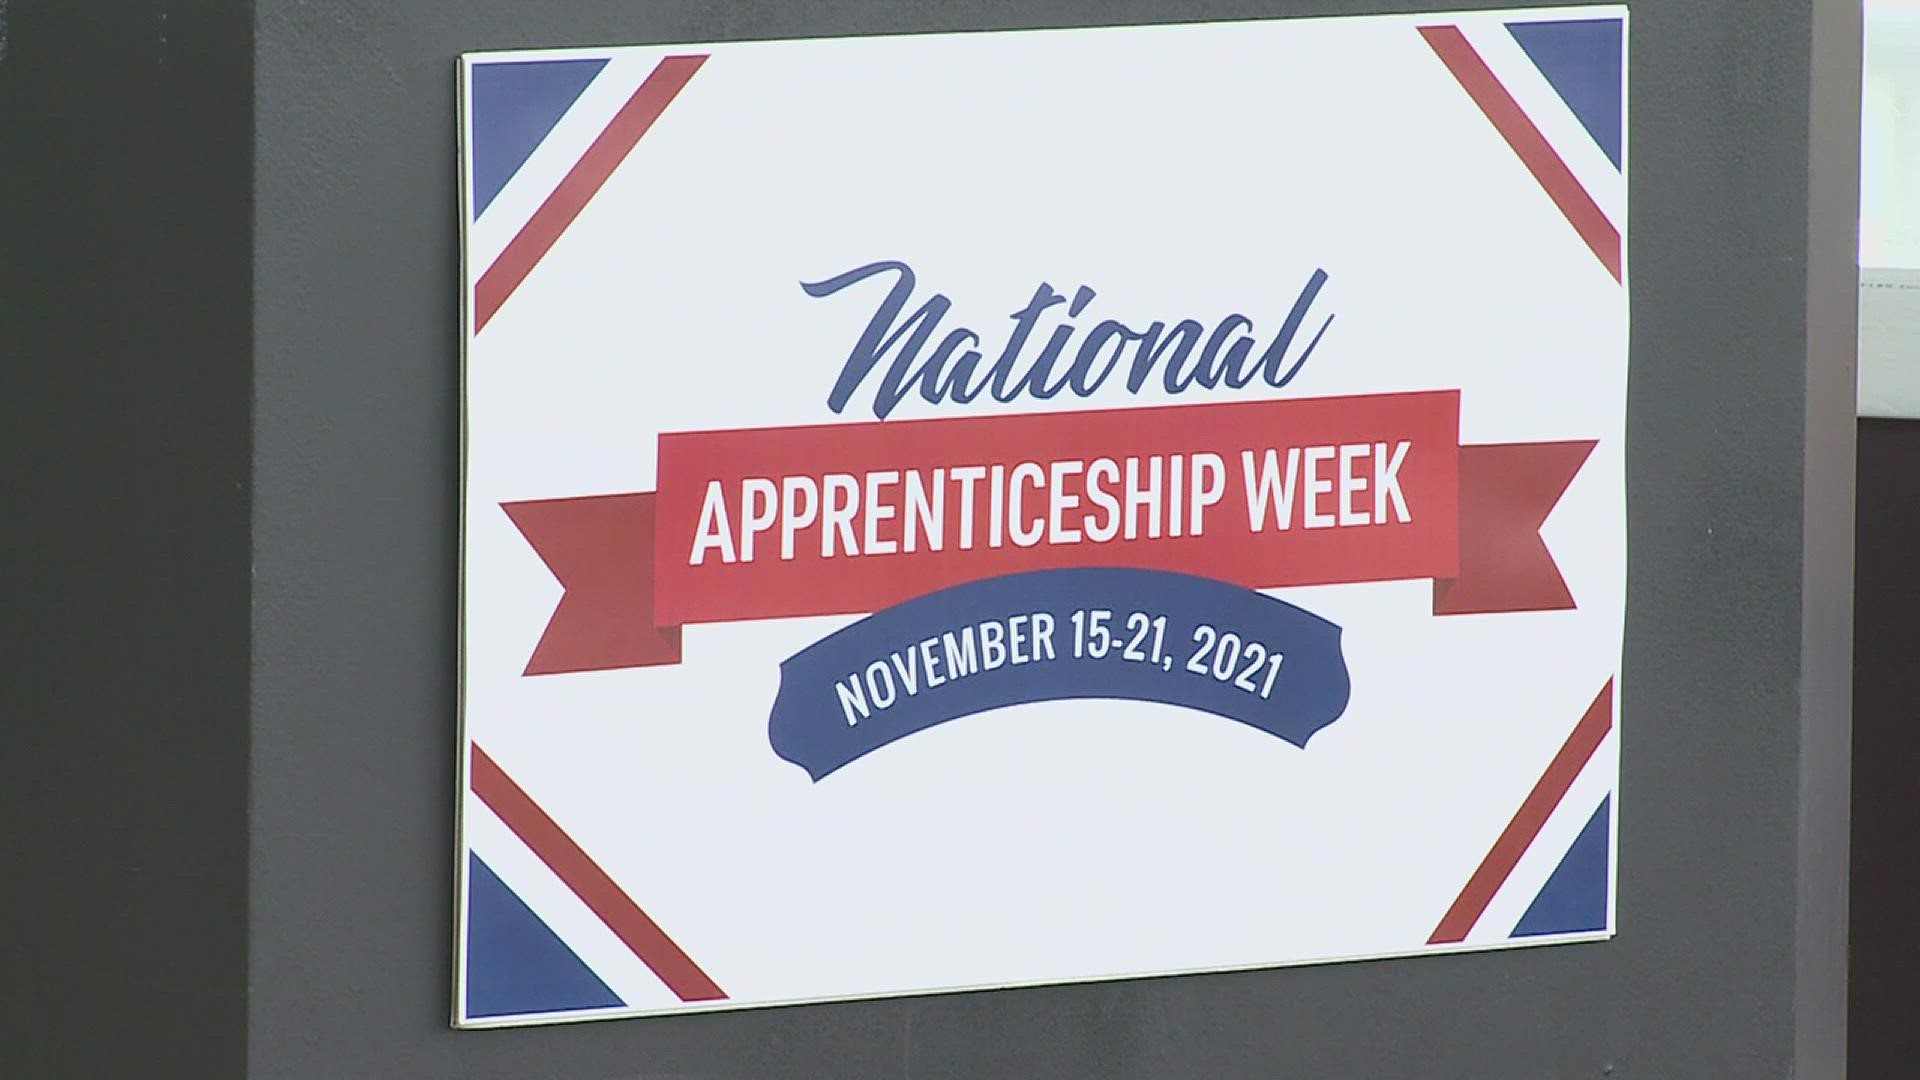 National Apprenticeship Week is November 15th through the 21st